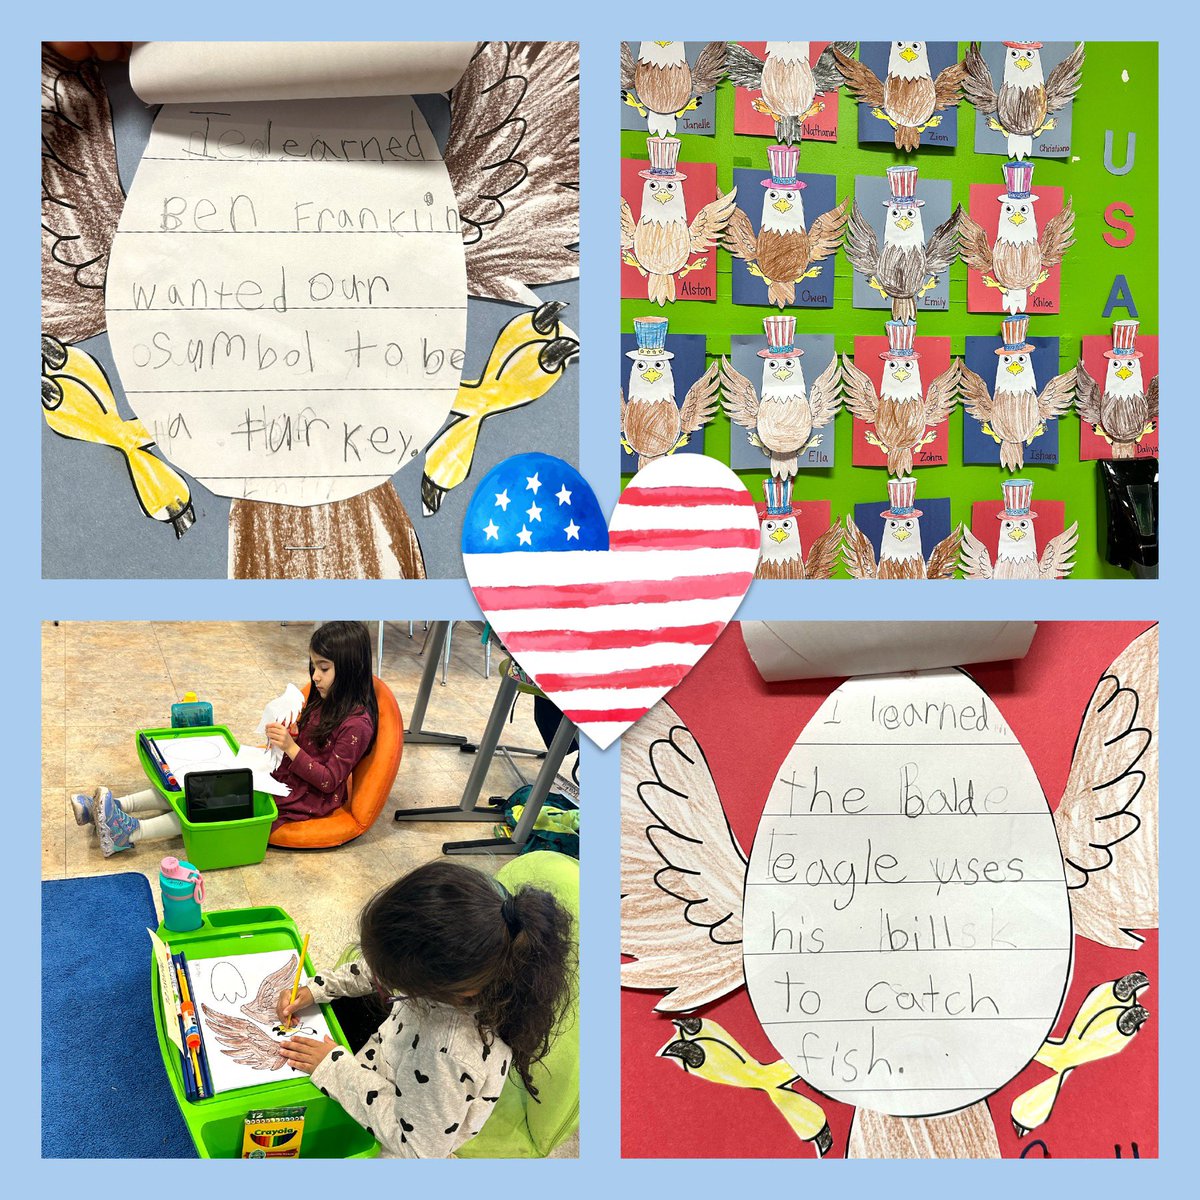 This week we have been learning about American symbols. Our learners did a great job learning facts about the bald eagle and how important it is to America! @Hampton_Street #mineolaproud